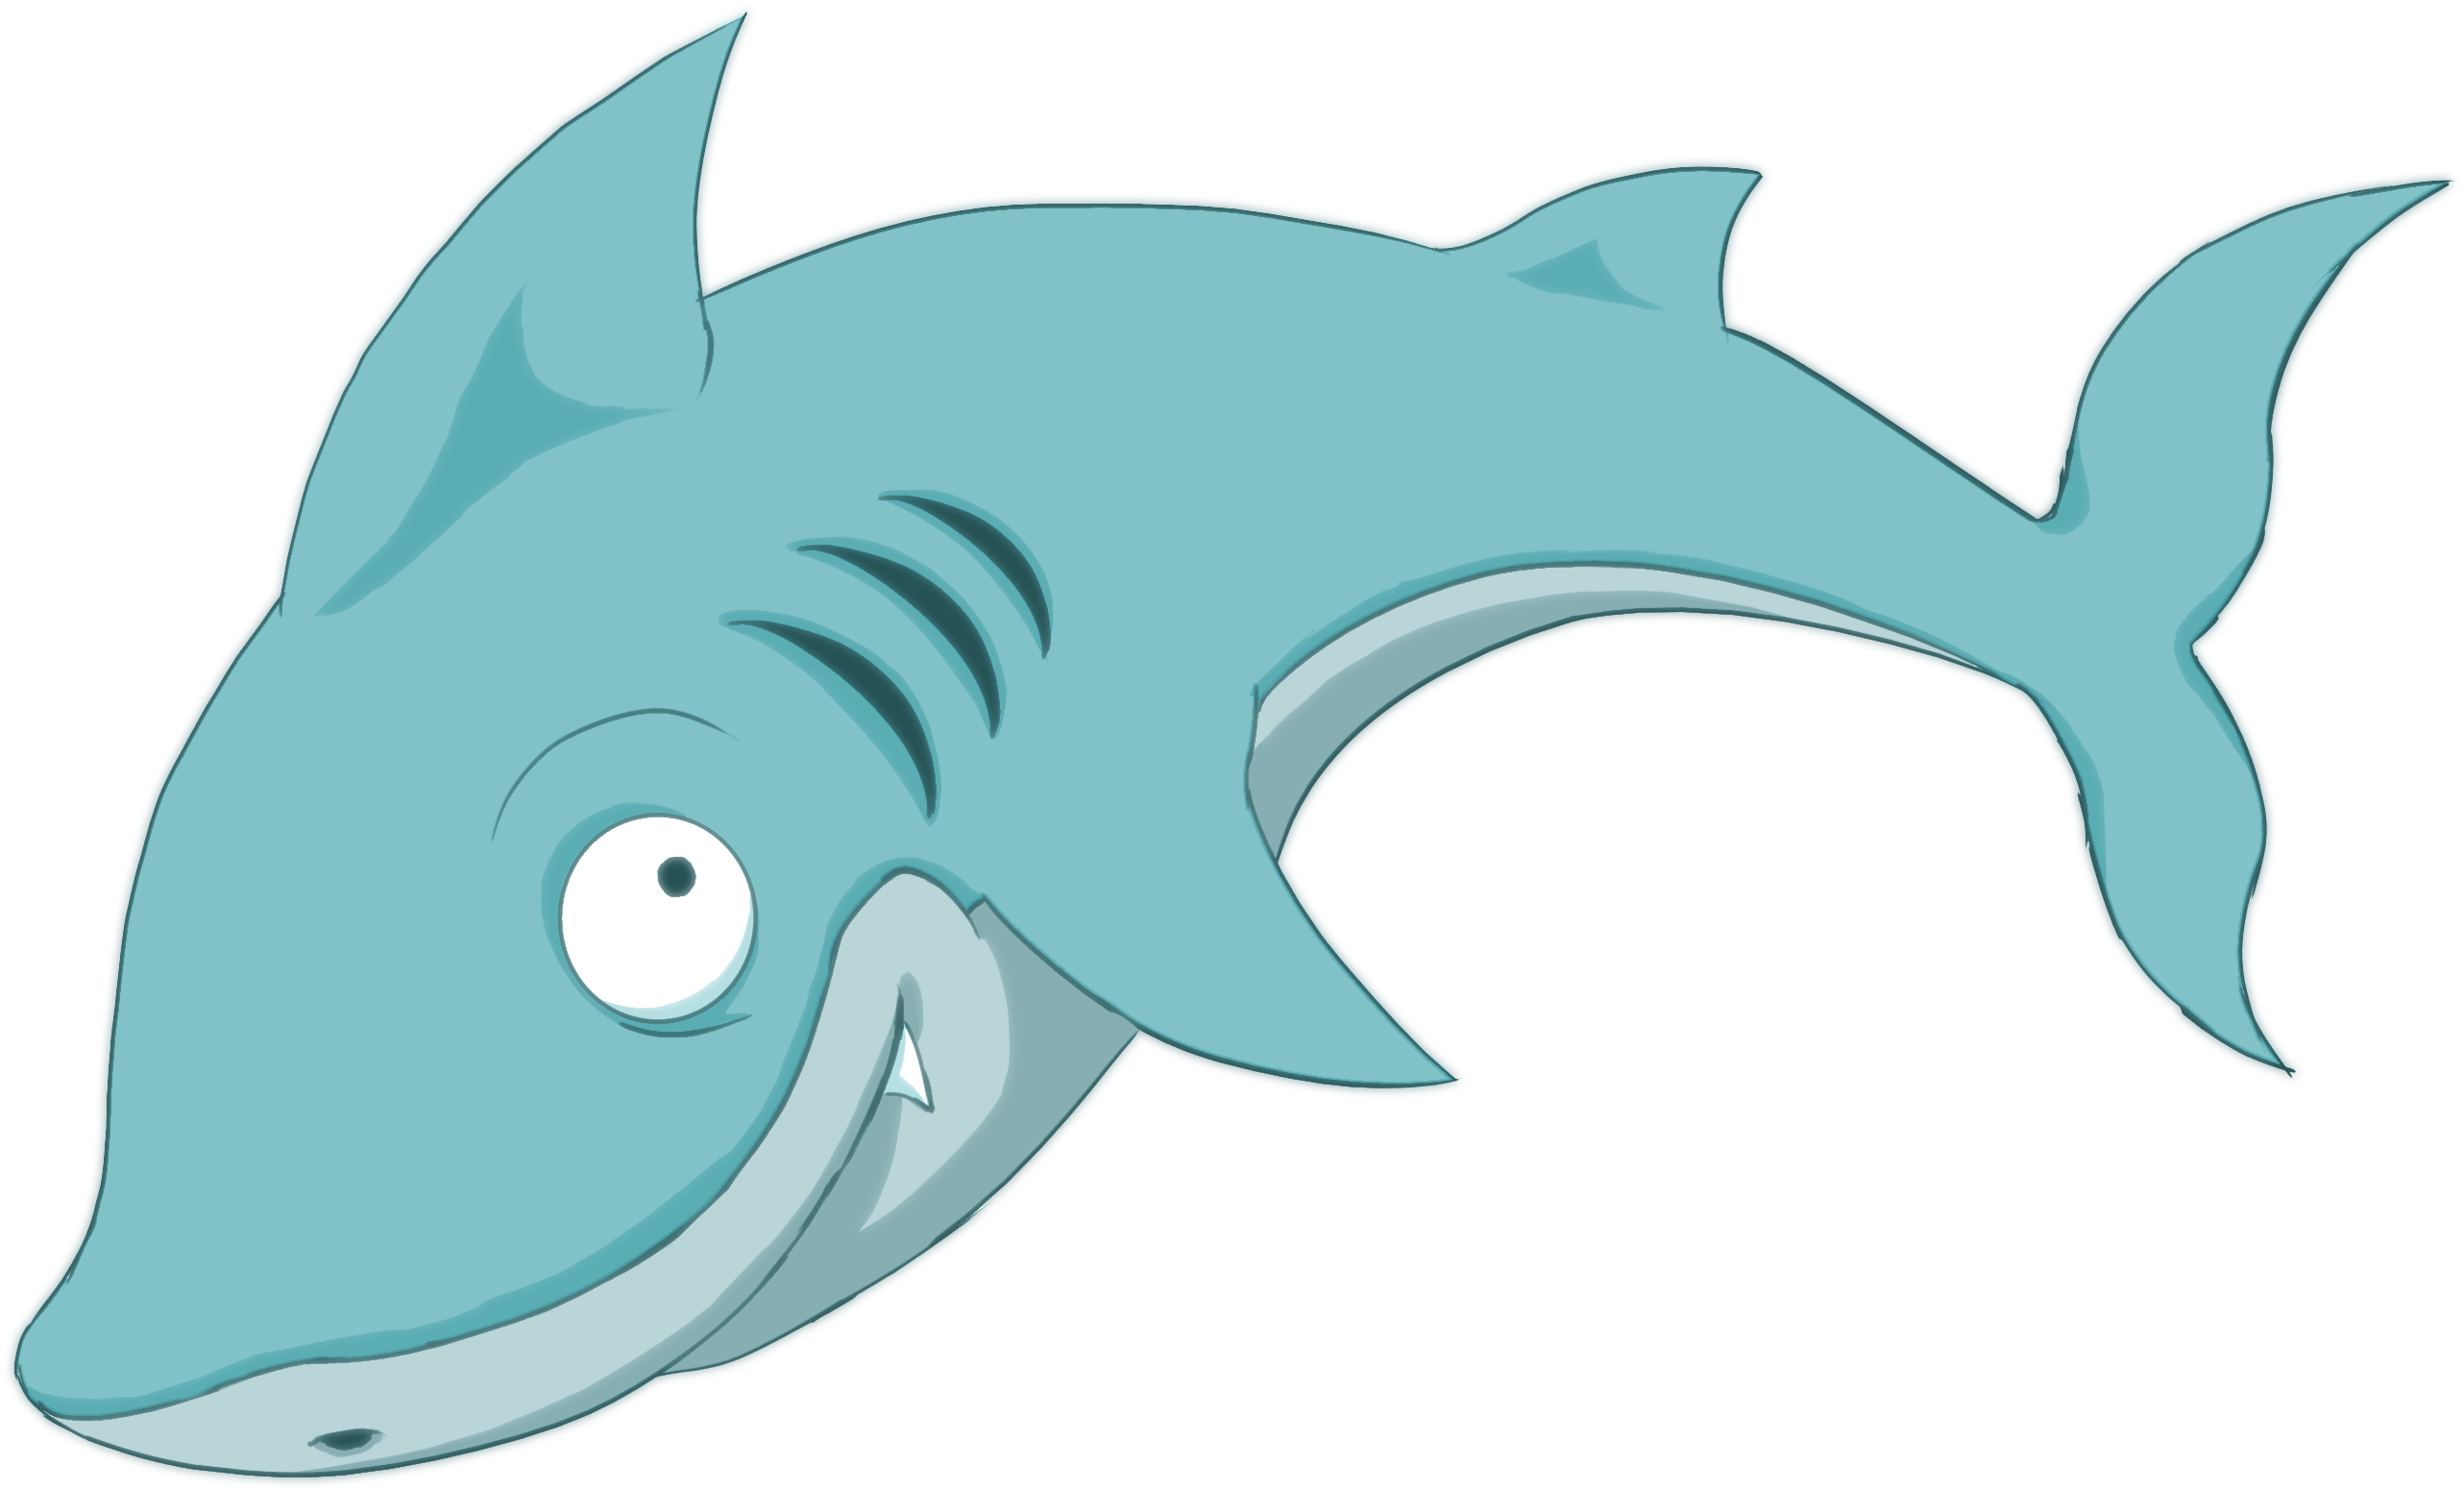 Download Cartoon Shark - Shark PNG Image with No Background 